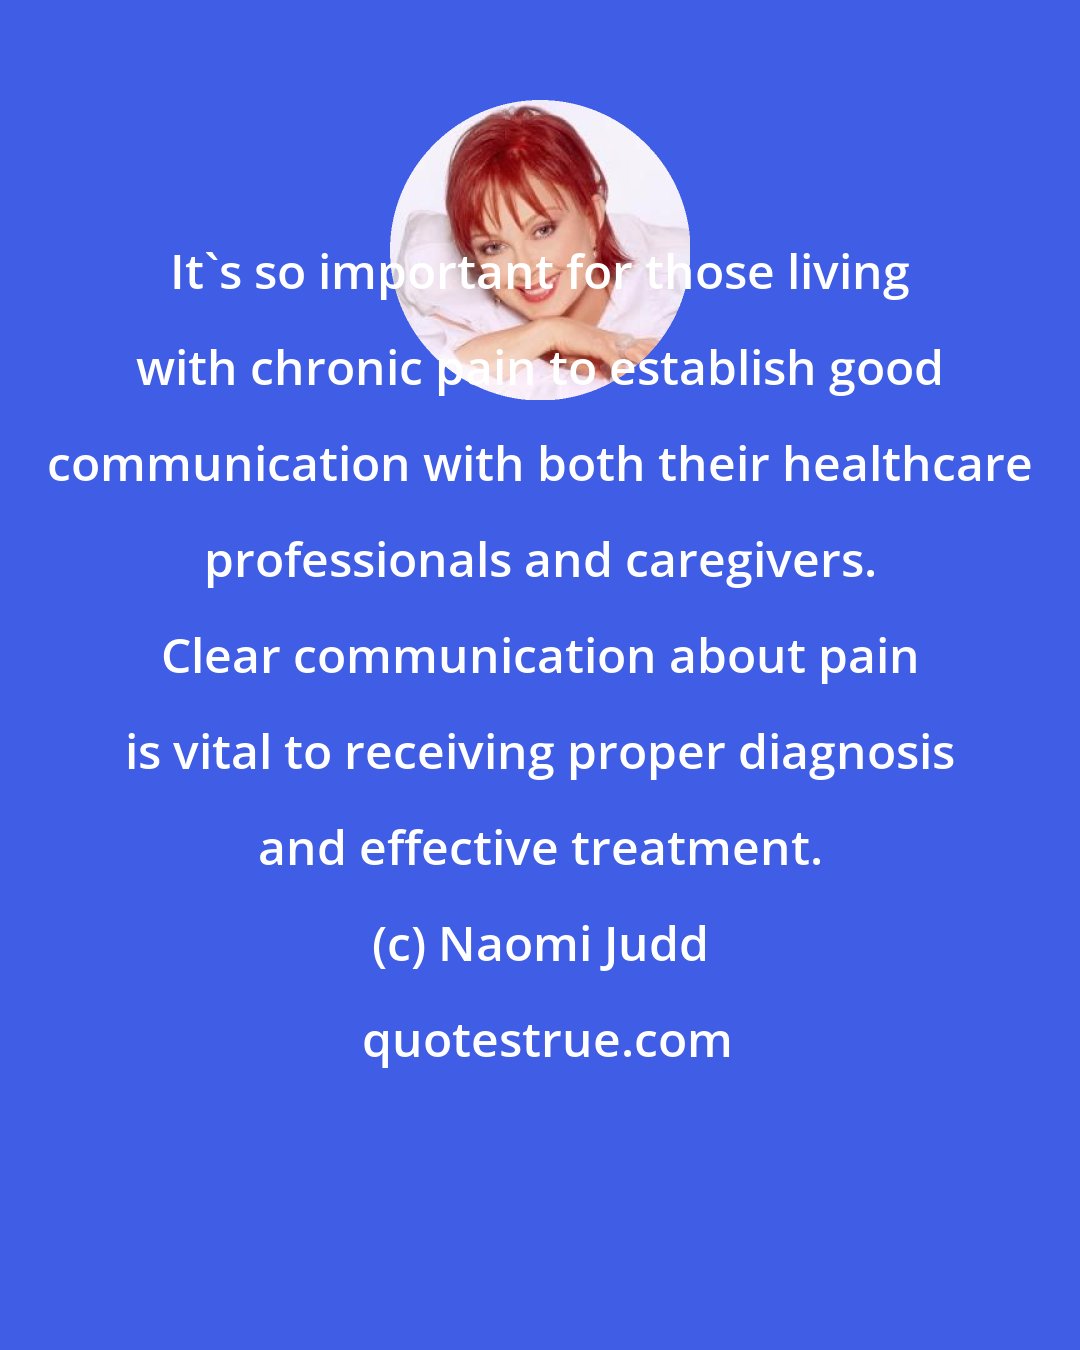 Naomi Judd: It's so important for those living with chronic pain to establish good communication with both their healthcare professionals and caregivers. Clear communication about pain is vital to receiving proper diagnosis and effective treatment.